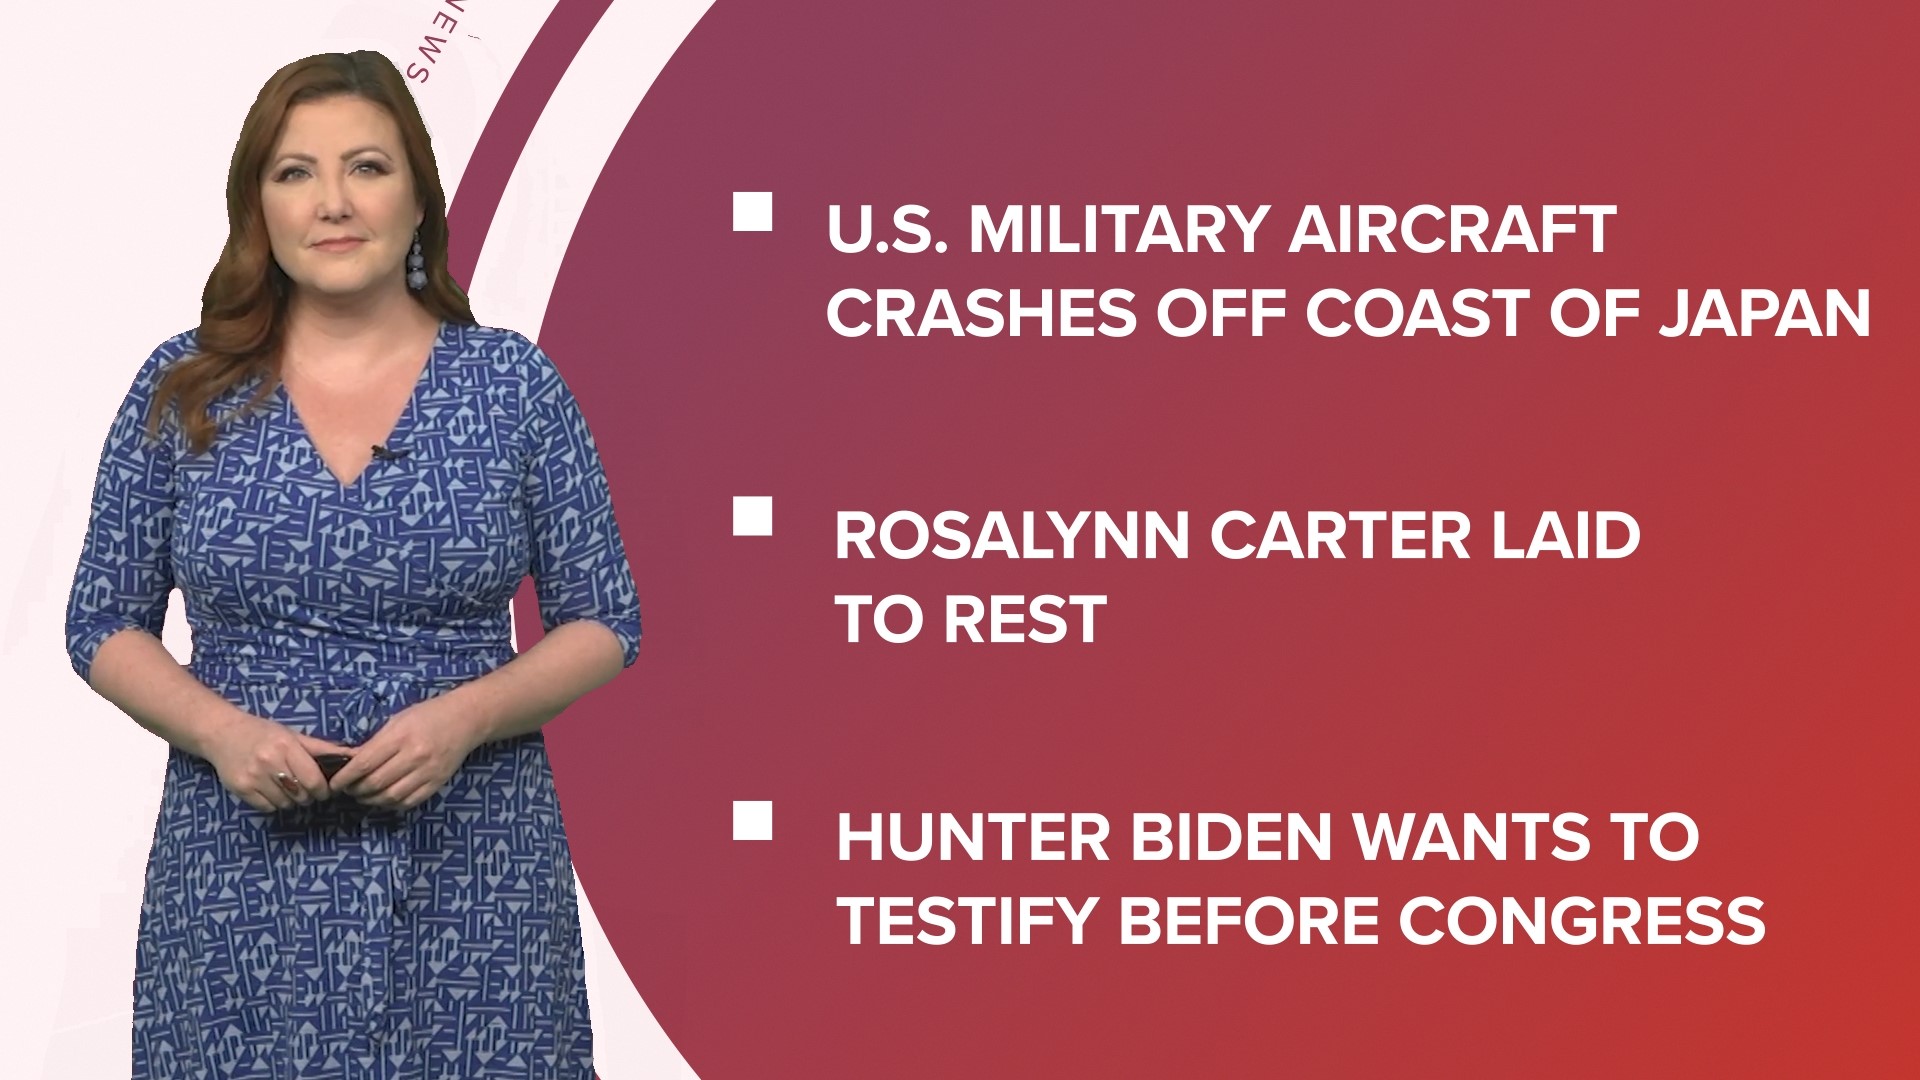 A look at what is happening in the news from Rosalynn Carter laid to rest in Georgia to workers rescued from tunnel collapse in India and a shoe giveaway surprise.